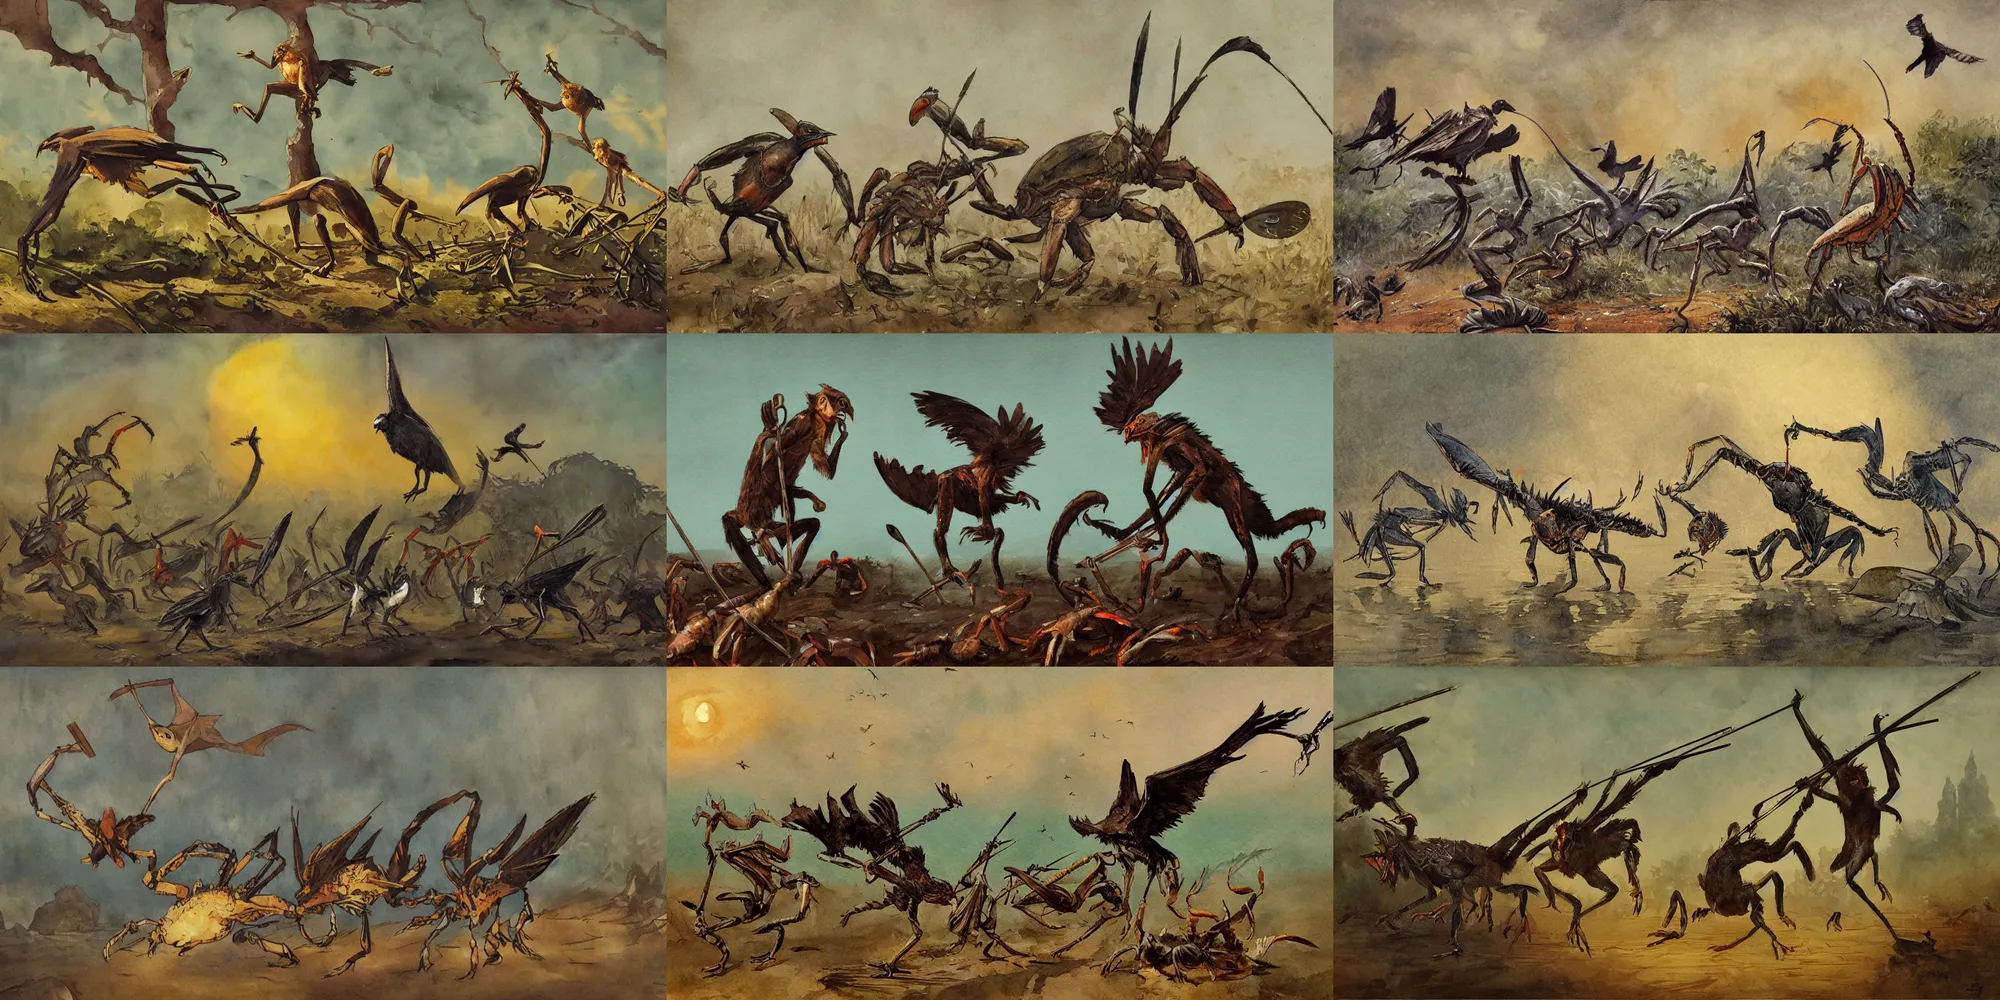 Prompt: battle scene with squabbling long - eared crow - monkeys with pitchforks fighting a giant crab - seagull beast | tonalist, art nouveau, inks, watercolor wash, vibrant colors, pyrrol scarlet, chiaroscuro, grisaille, mud, high contrast, backlighting, dust, golden hour